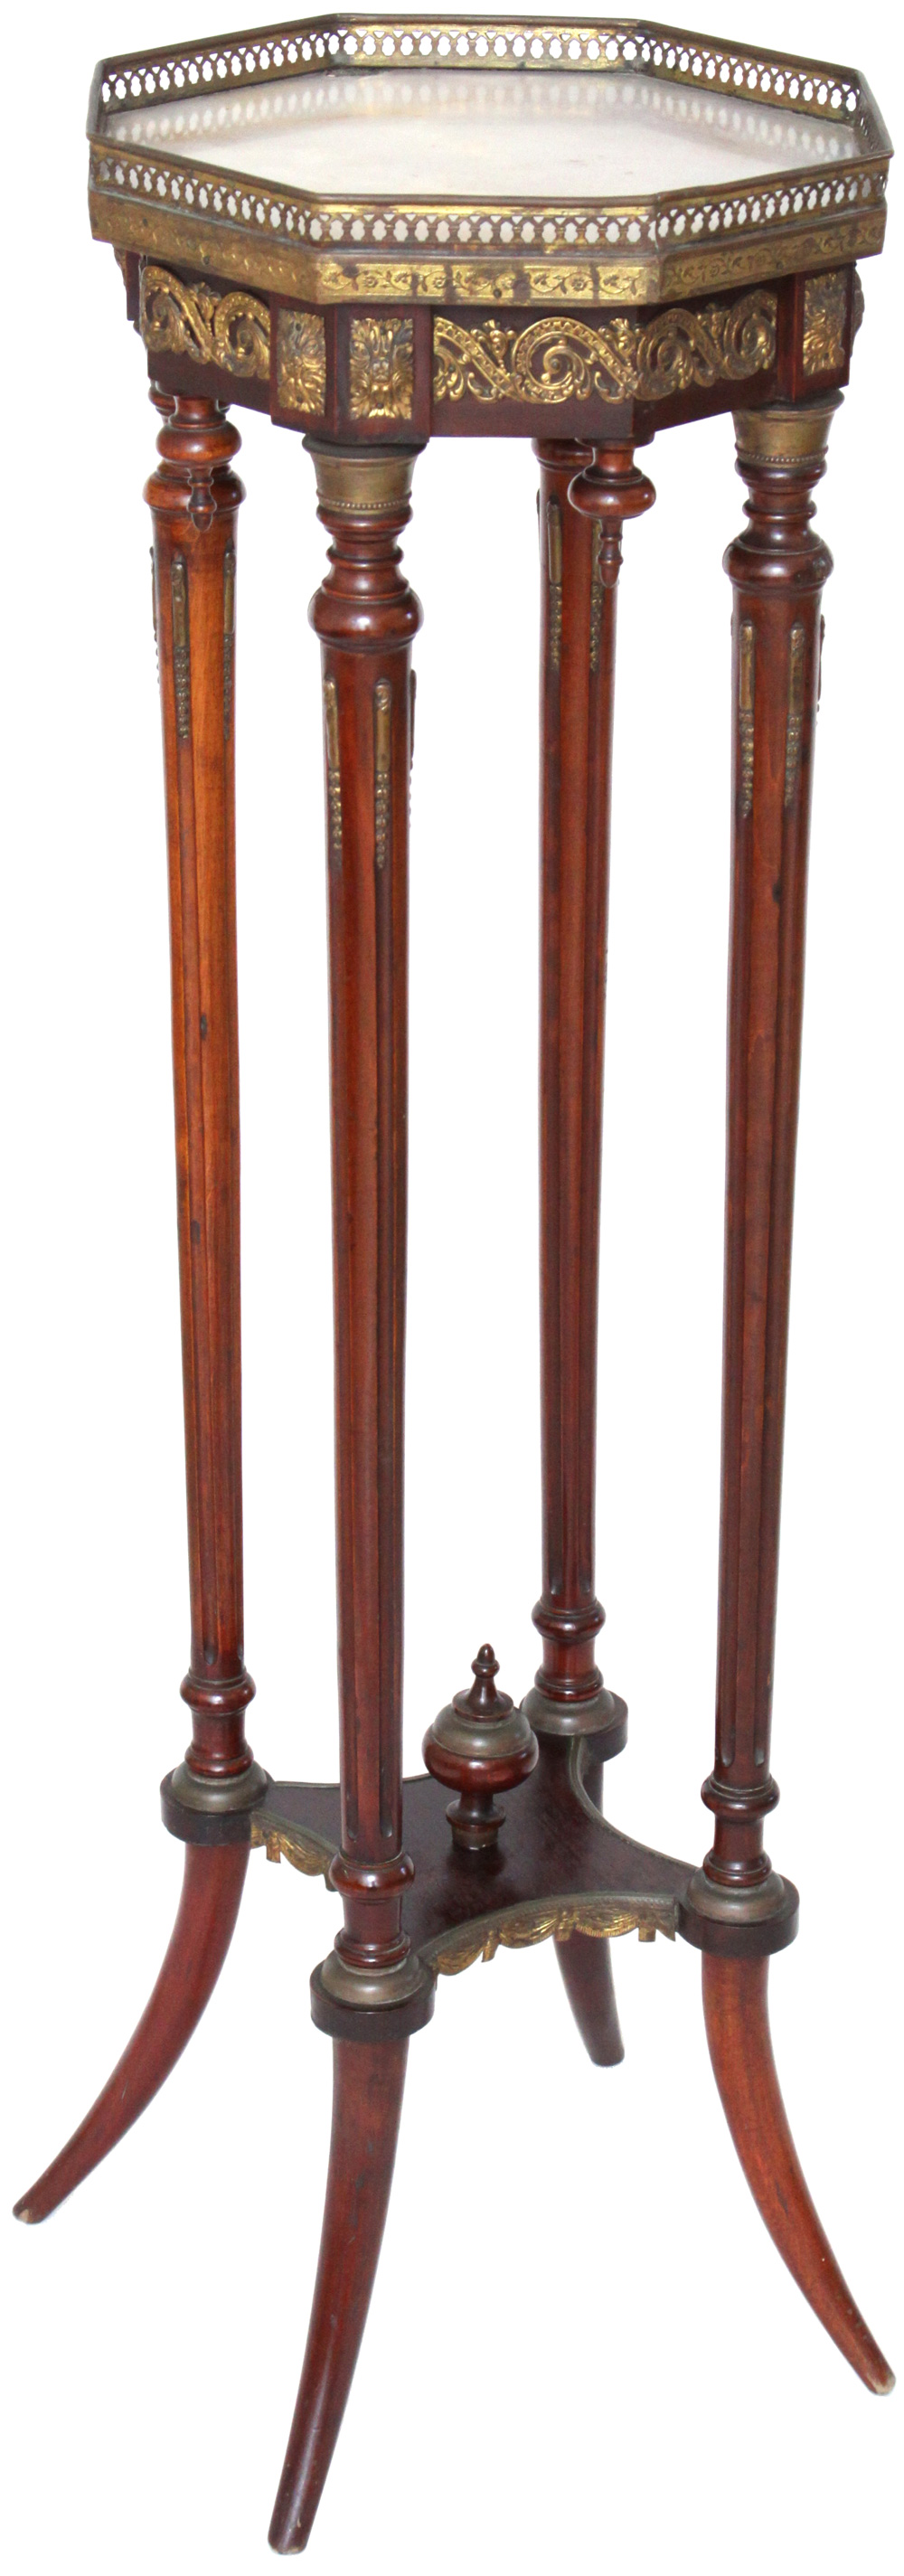 A Tall Antique French Plant Stand with mahogany frame and octagon Marble Top - מעמד לעציץ צרפתי עתיק - Back To List of Antique Furniture